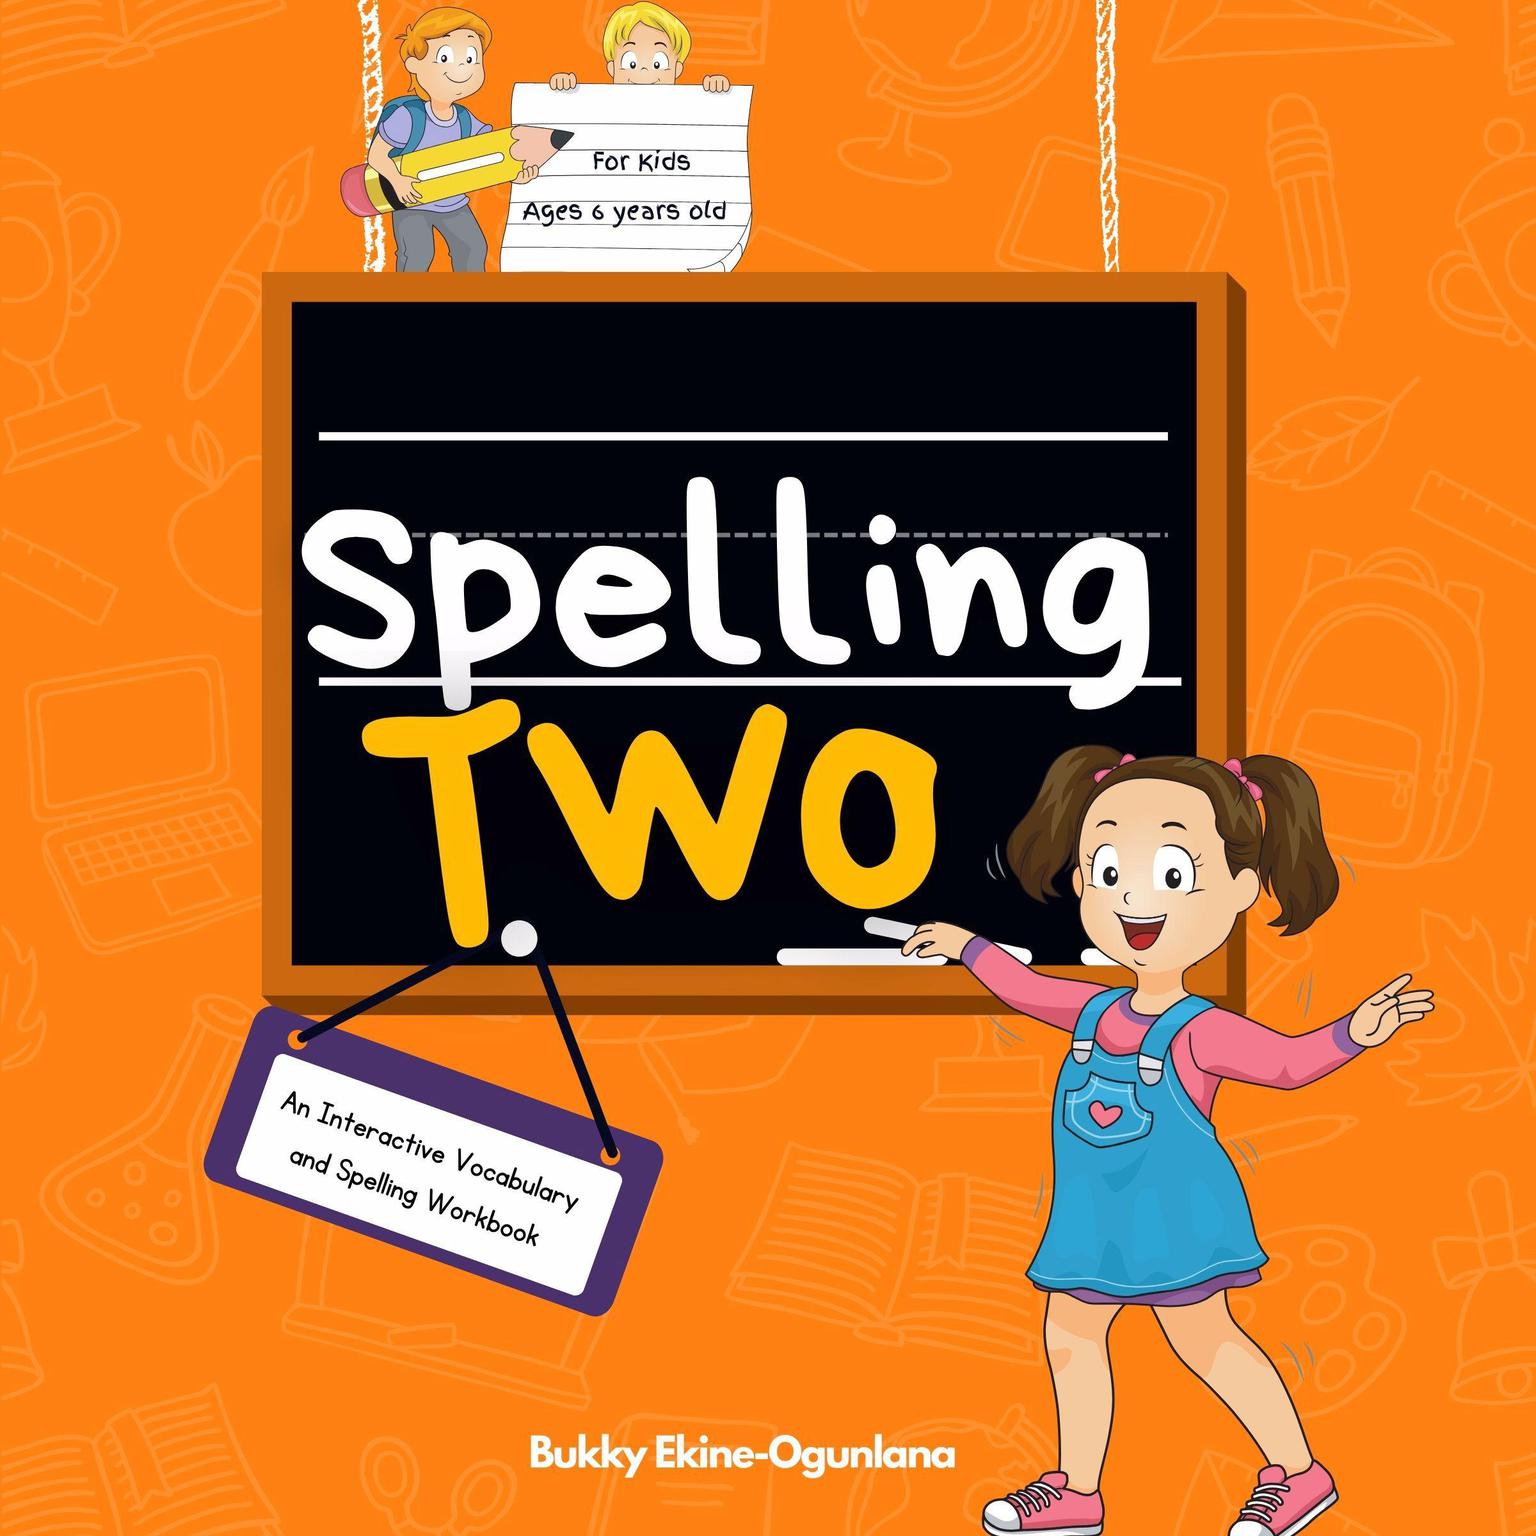 Spelling Two (Abridged): An Interactive Vocabulary and Spelling Workbook for 6-Year-Olds (With Audiobook Lessons) Audiobook, by Bukky Ekine-Ogunlana